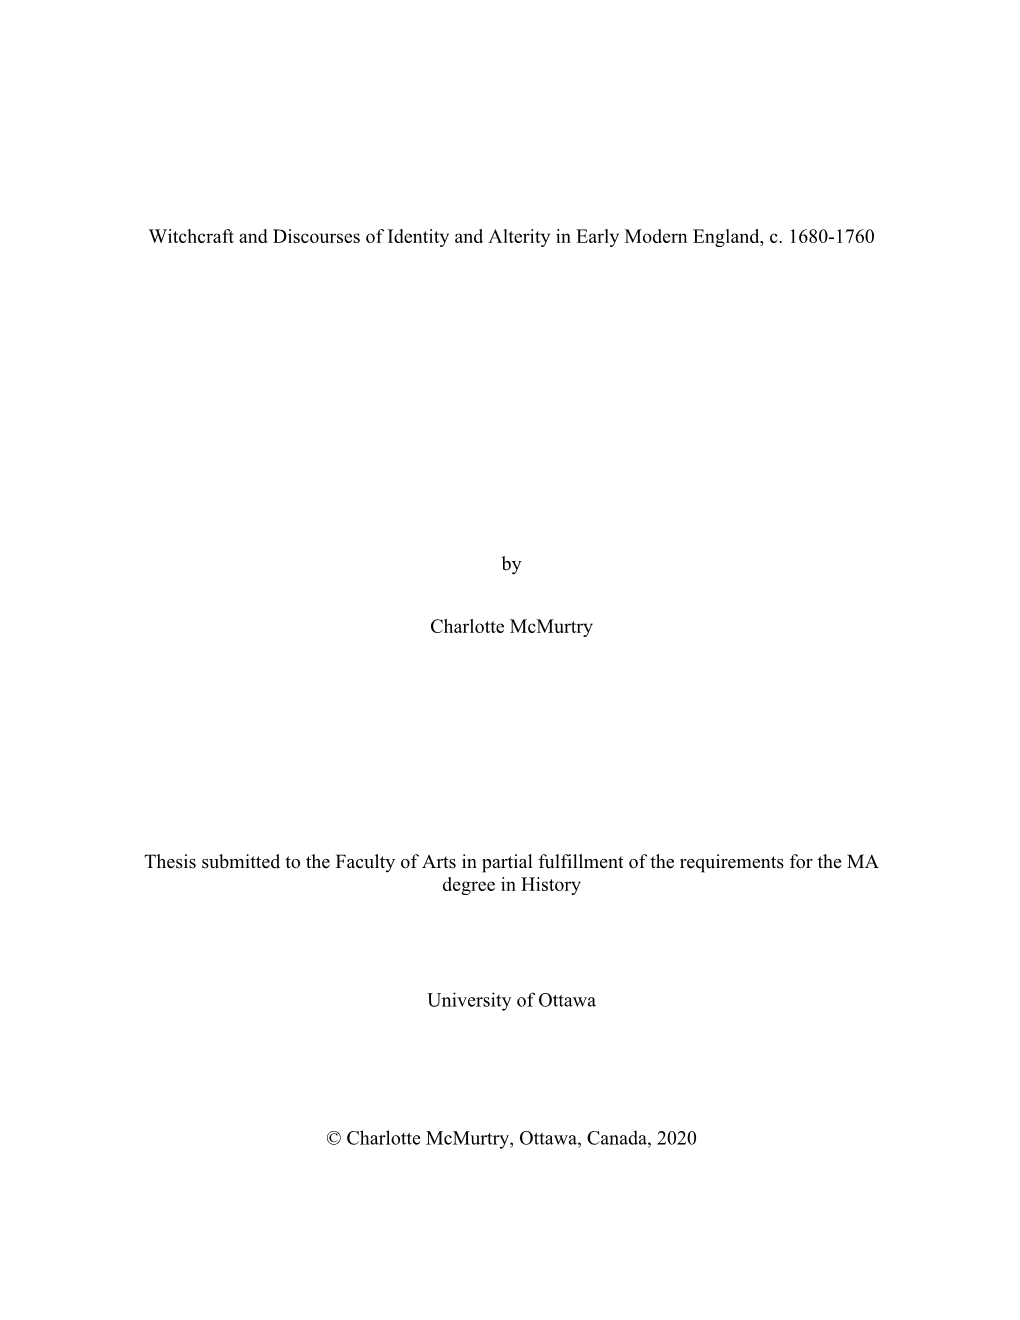 Mcmurtry MA Thesis 2020 REVISED